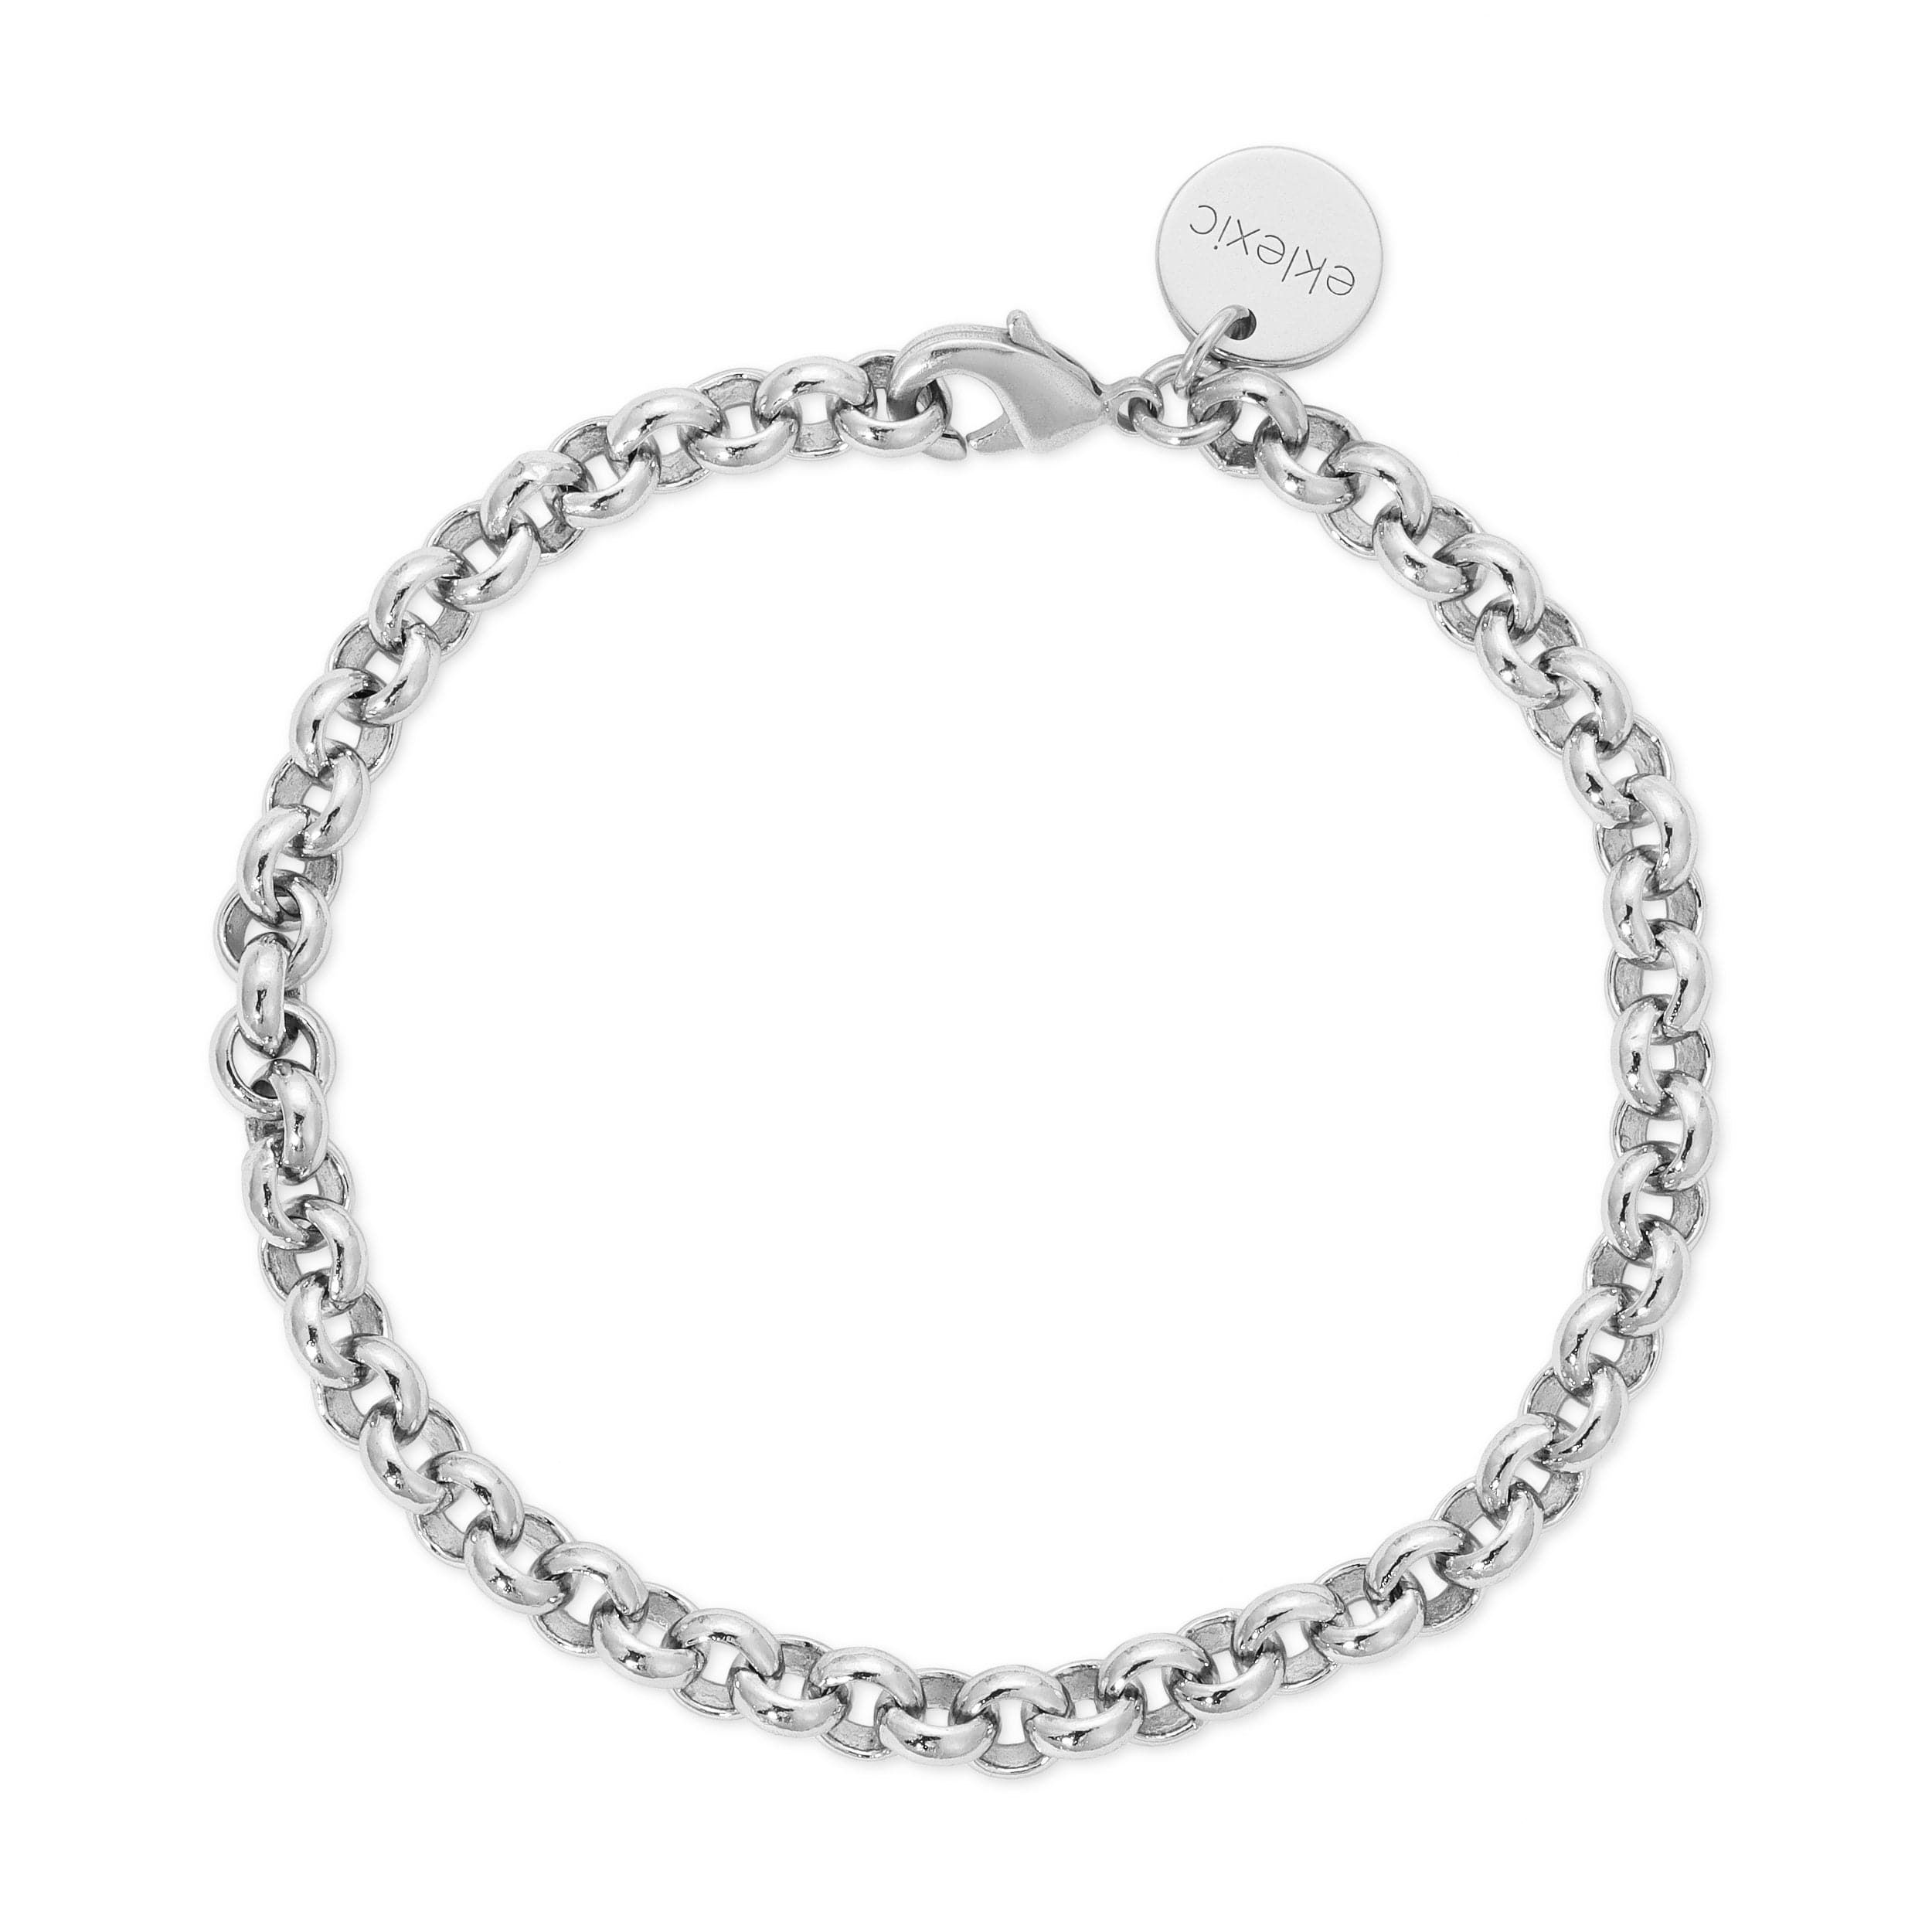 a silver bracelet with a heart charm